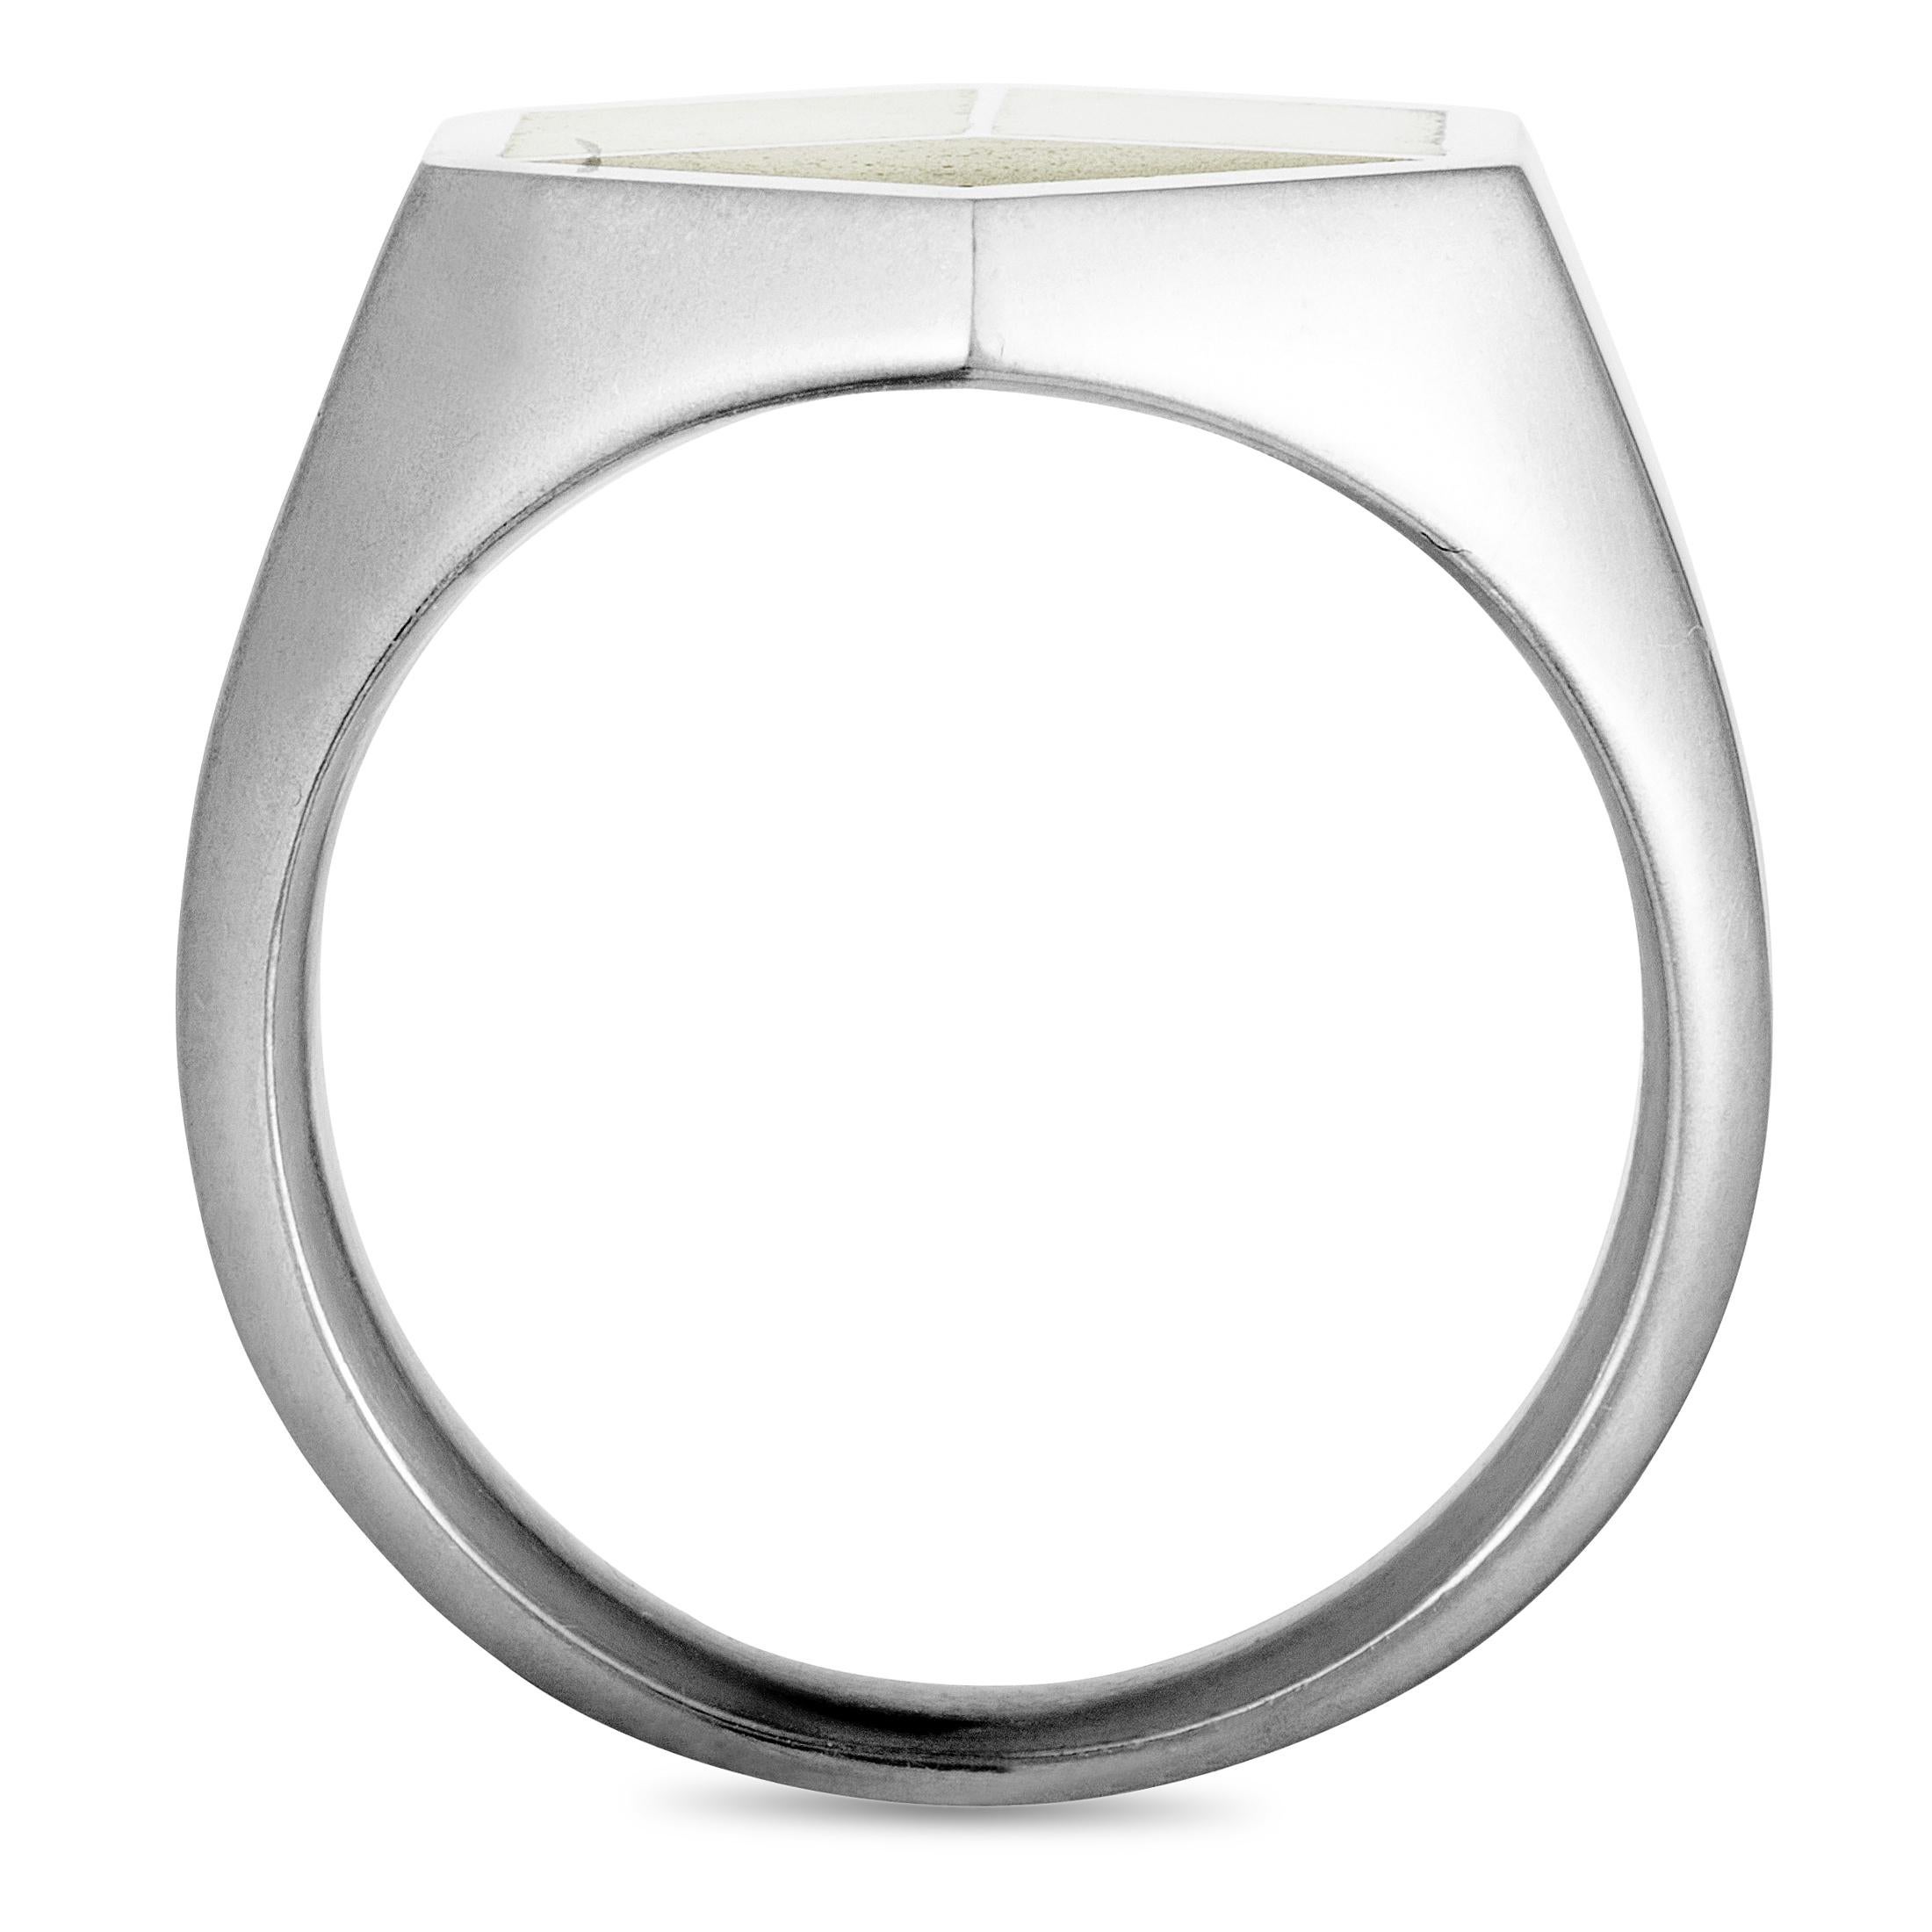 An incredibly bold, elegant design is marvelously presented in prestigious silver in this stunning ring from Georg Jensen that boasts a compellingly masculine appeal.
Ring Top Dimensions: 16mm x 20mm
Ring Size: 10.25